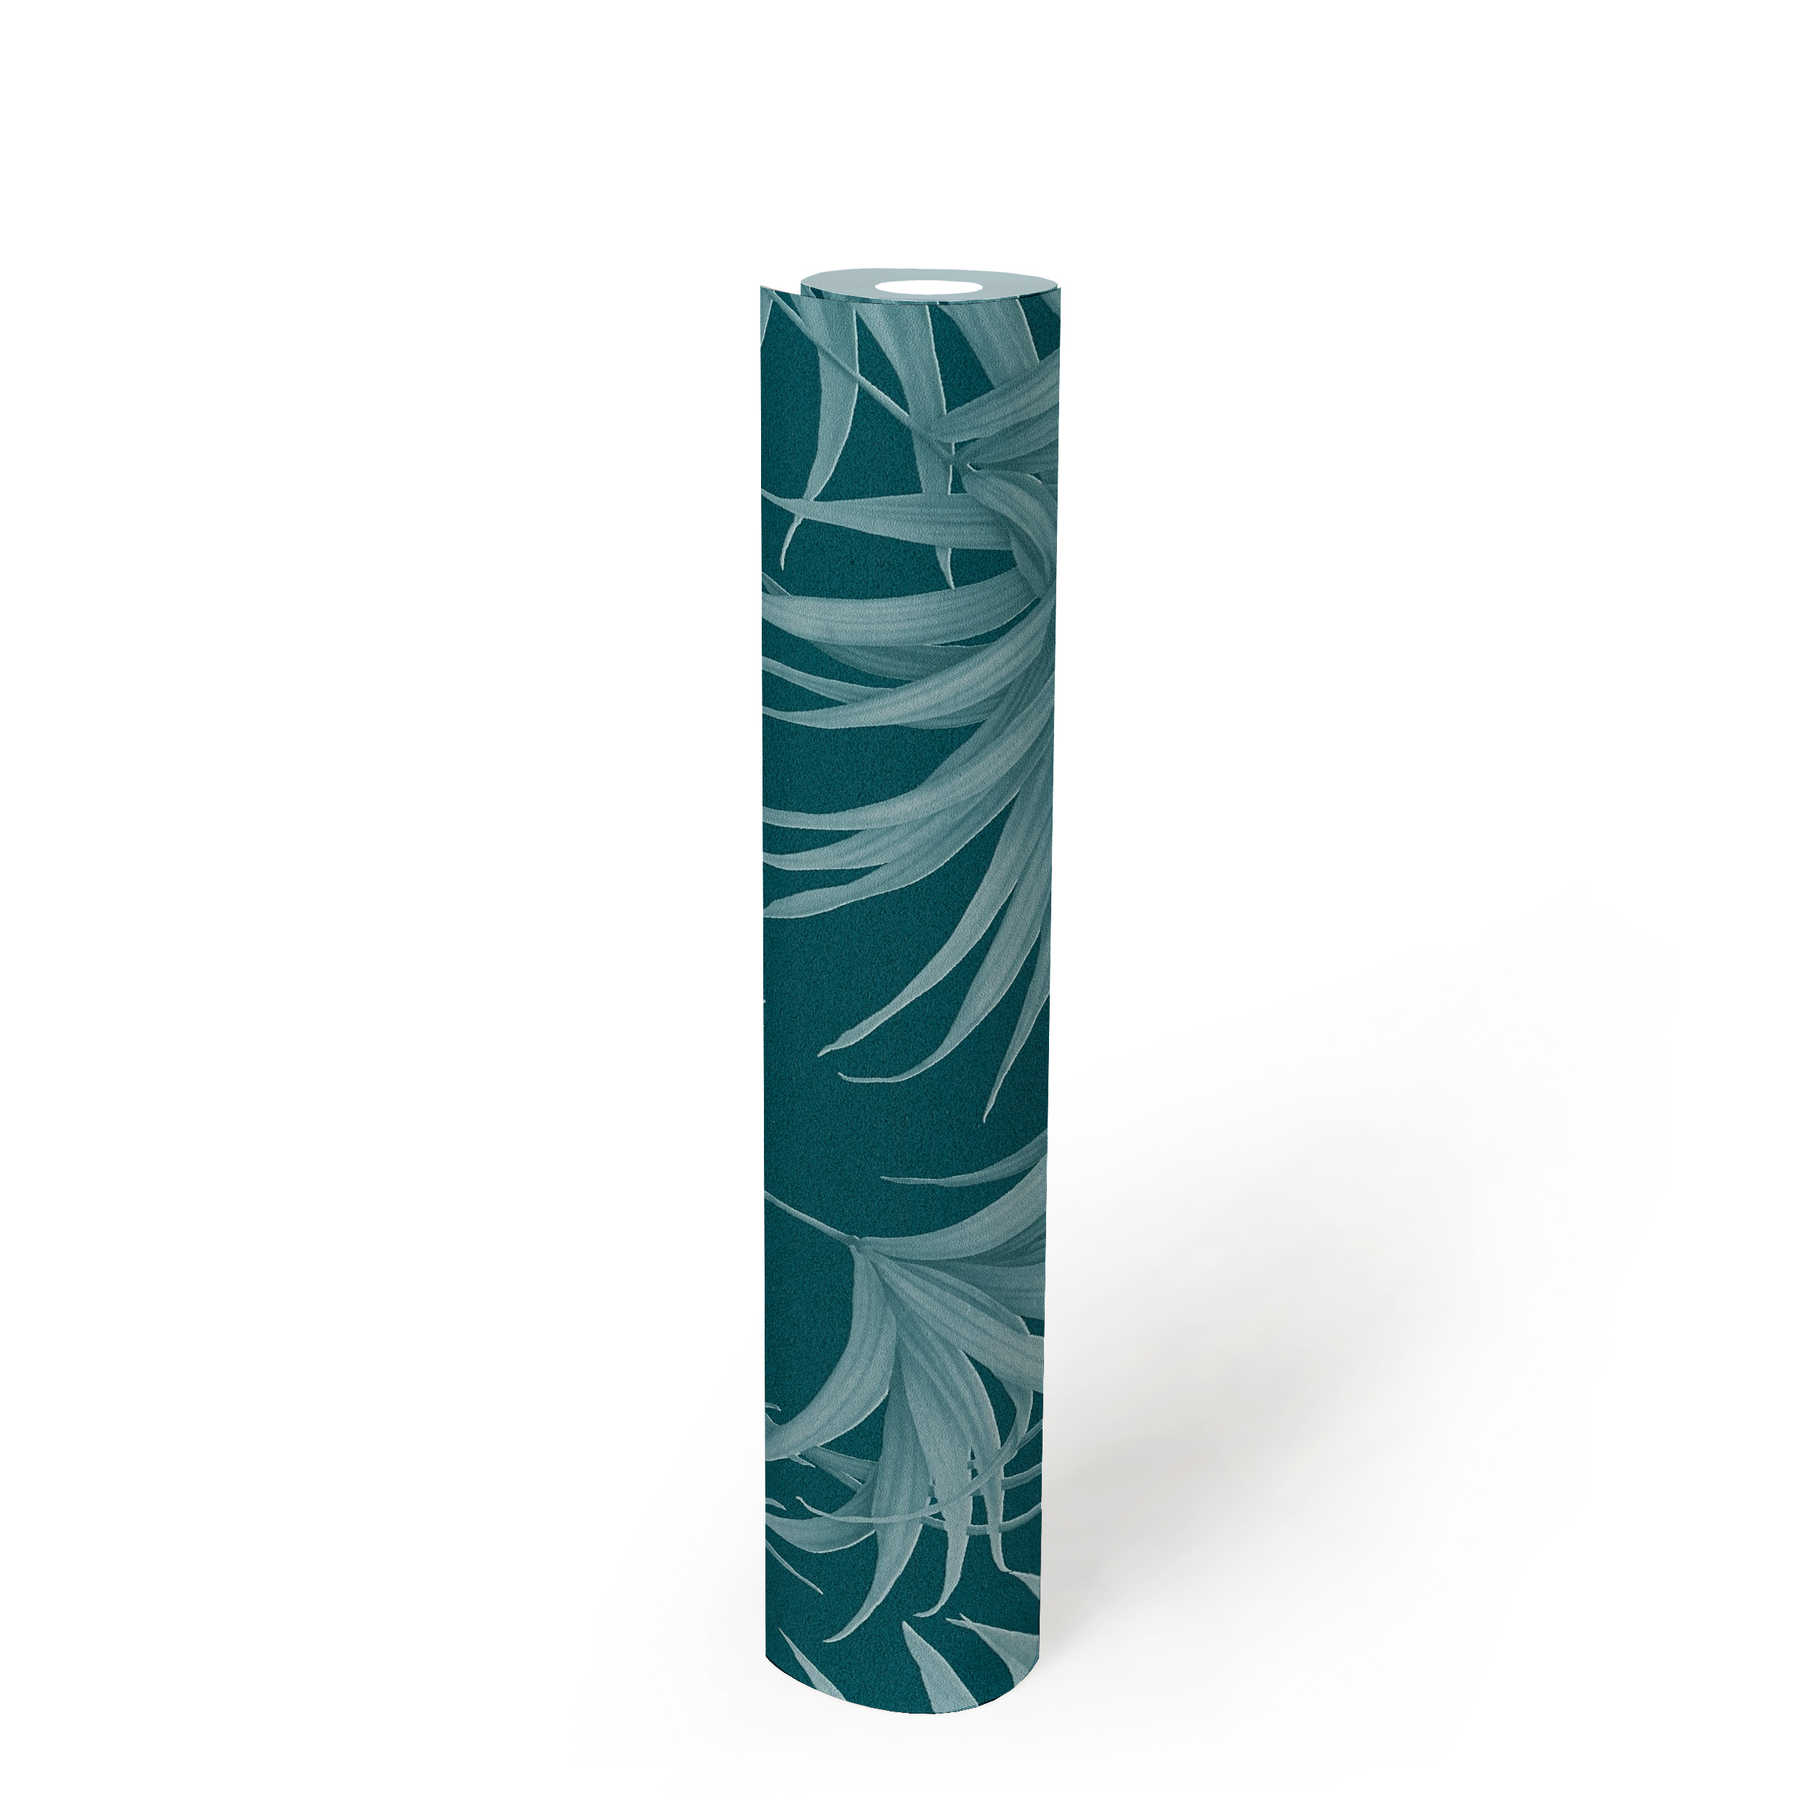             Palm leaves wallpaper with tone-on-tone pattern in petrol - blue
        